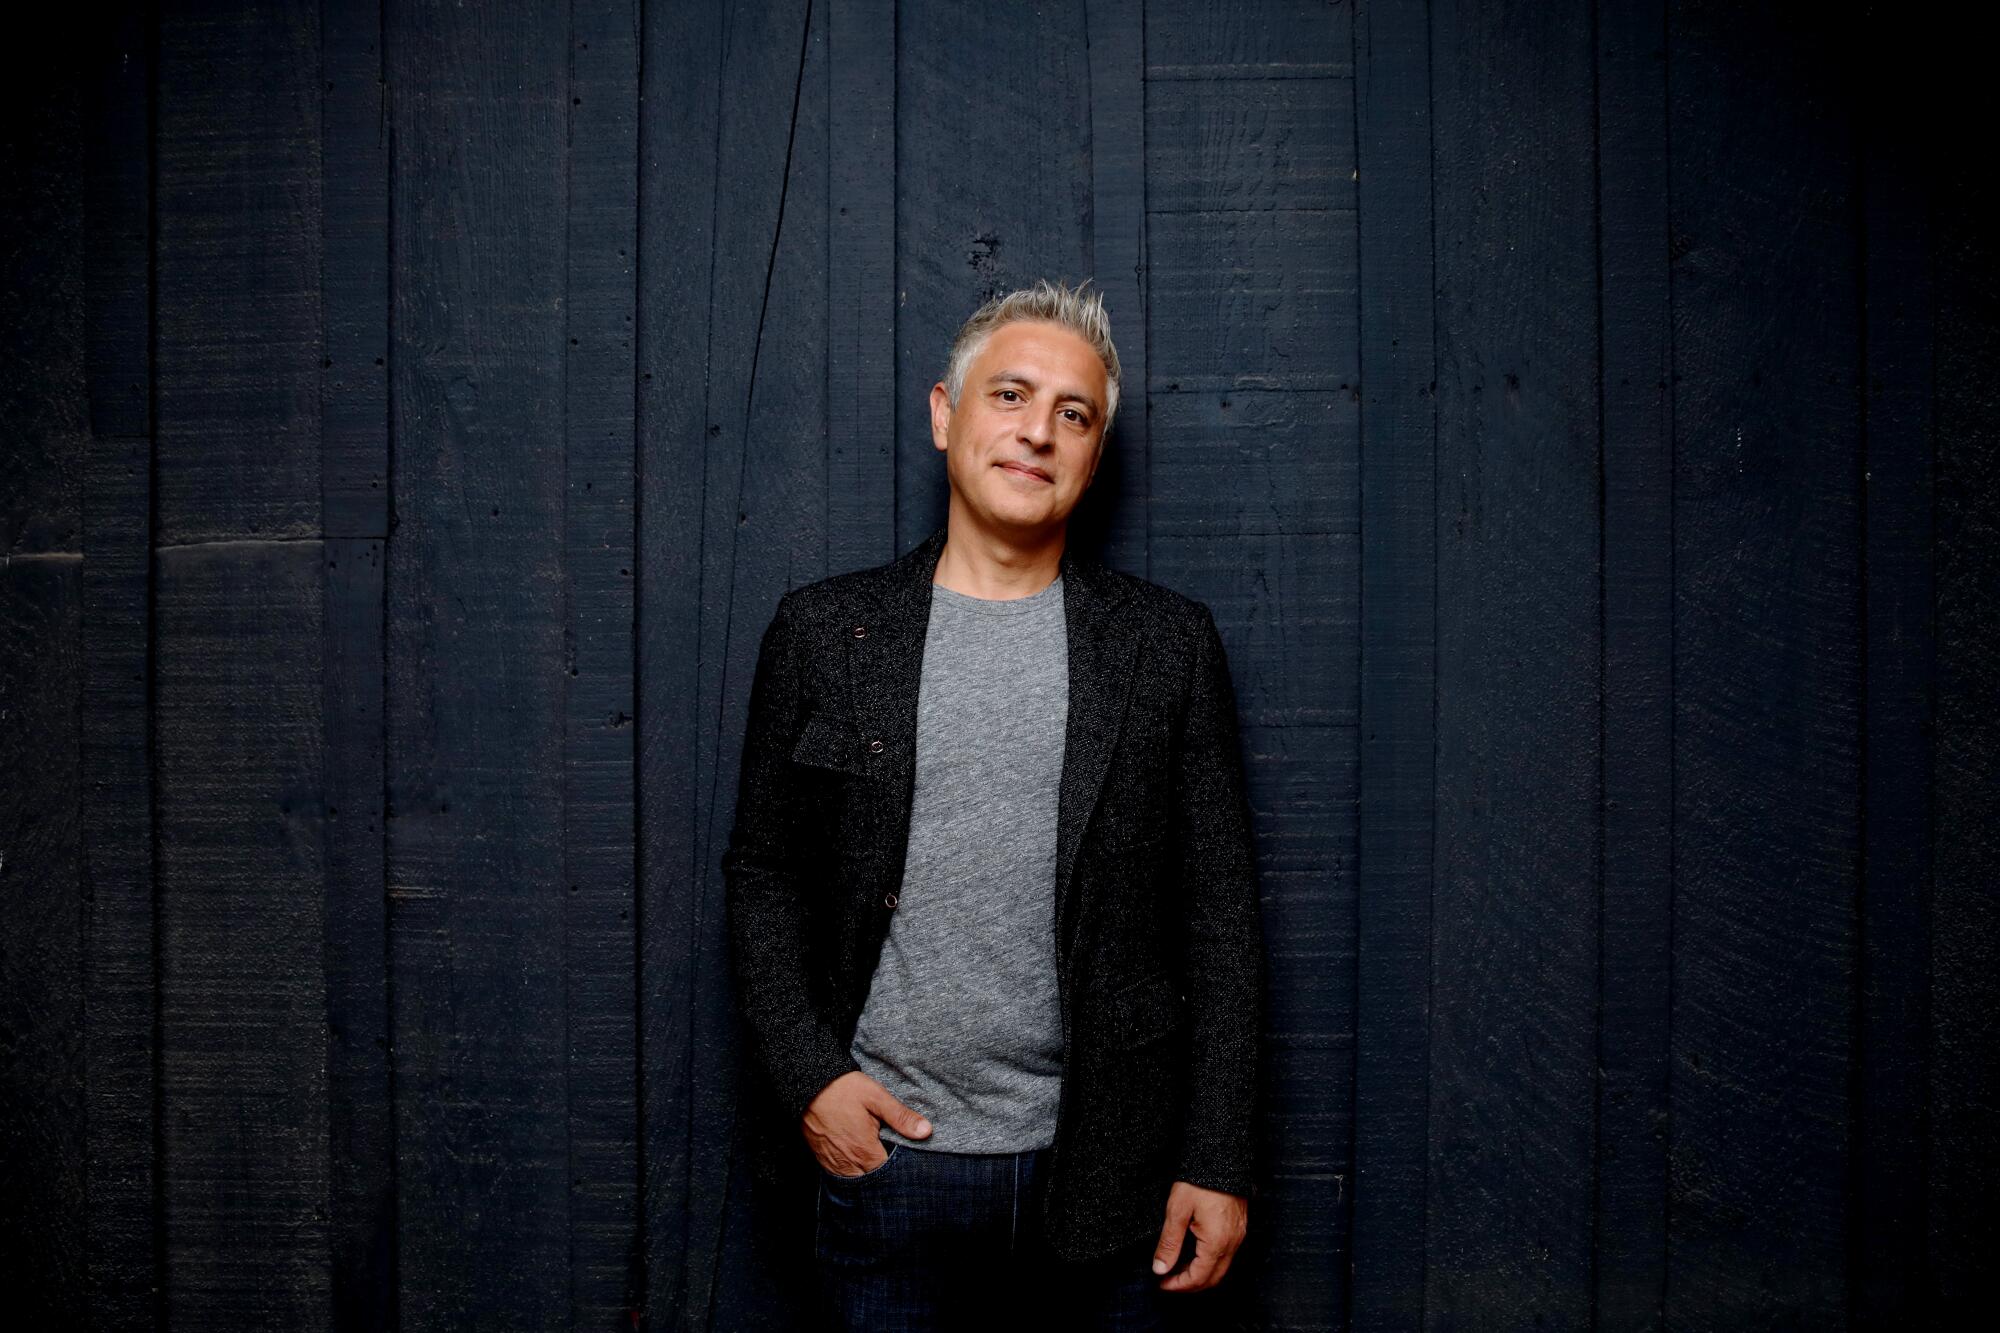 “I have a twenty-year career of making enemies,” says Reza Aslan, whose latest book is "An American in Persia."